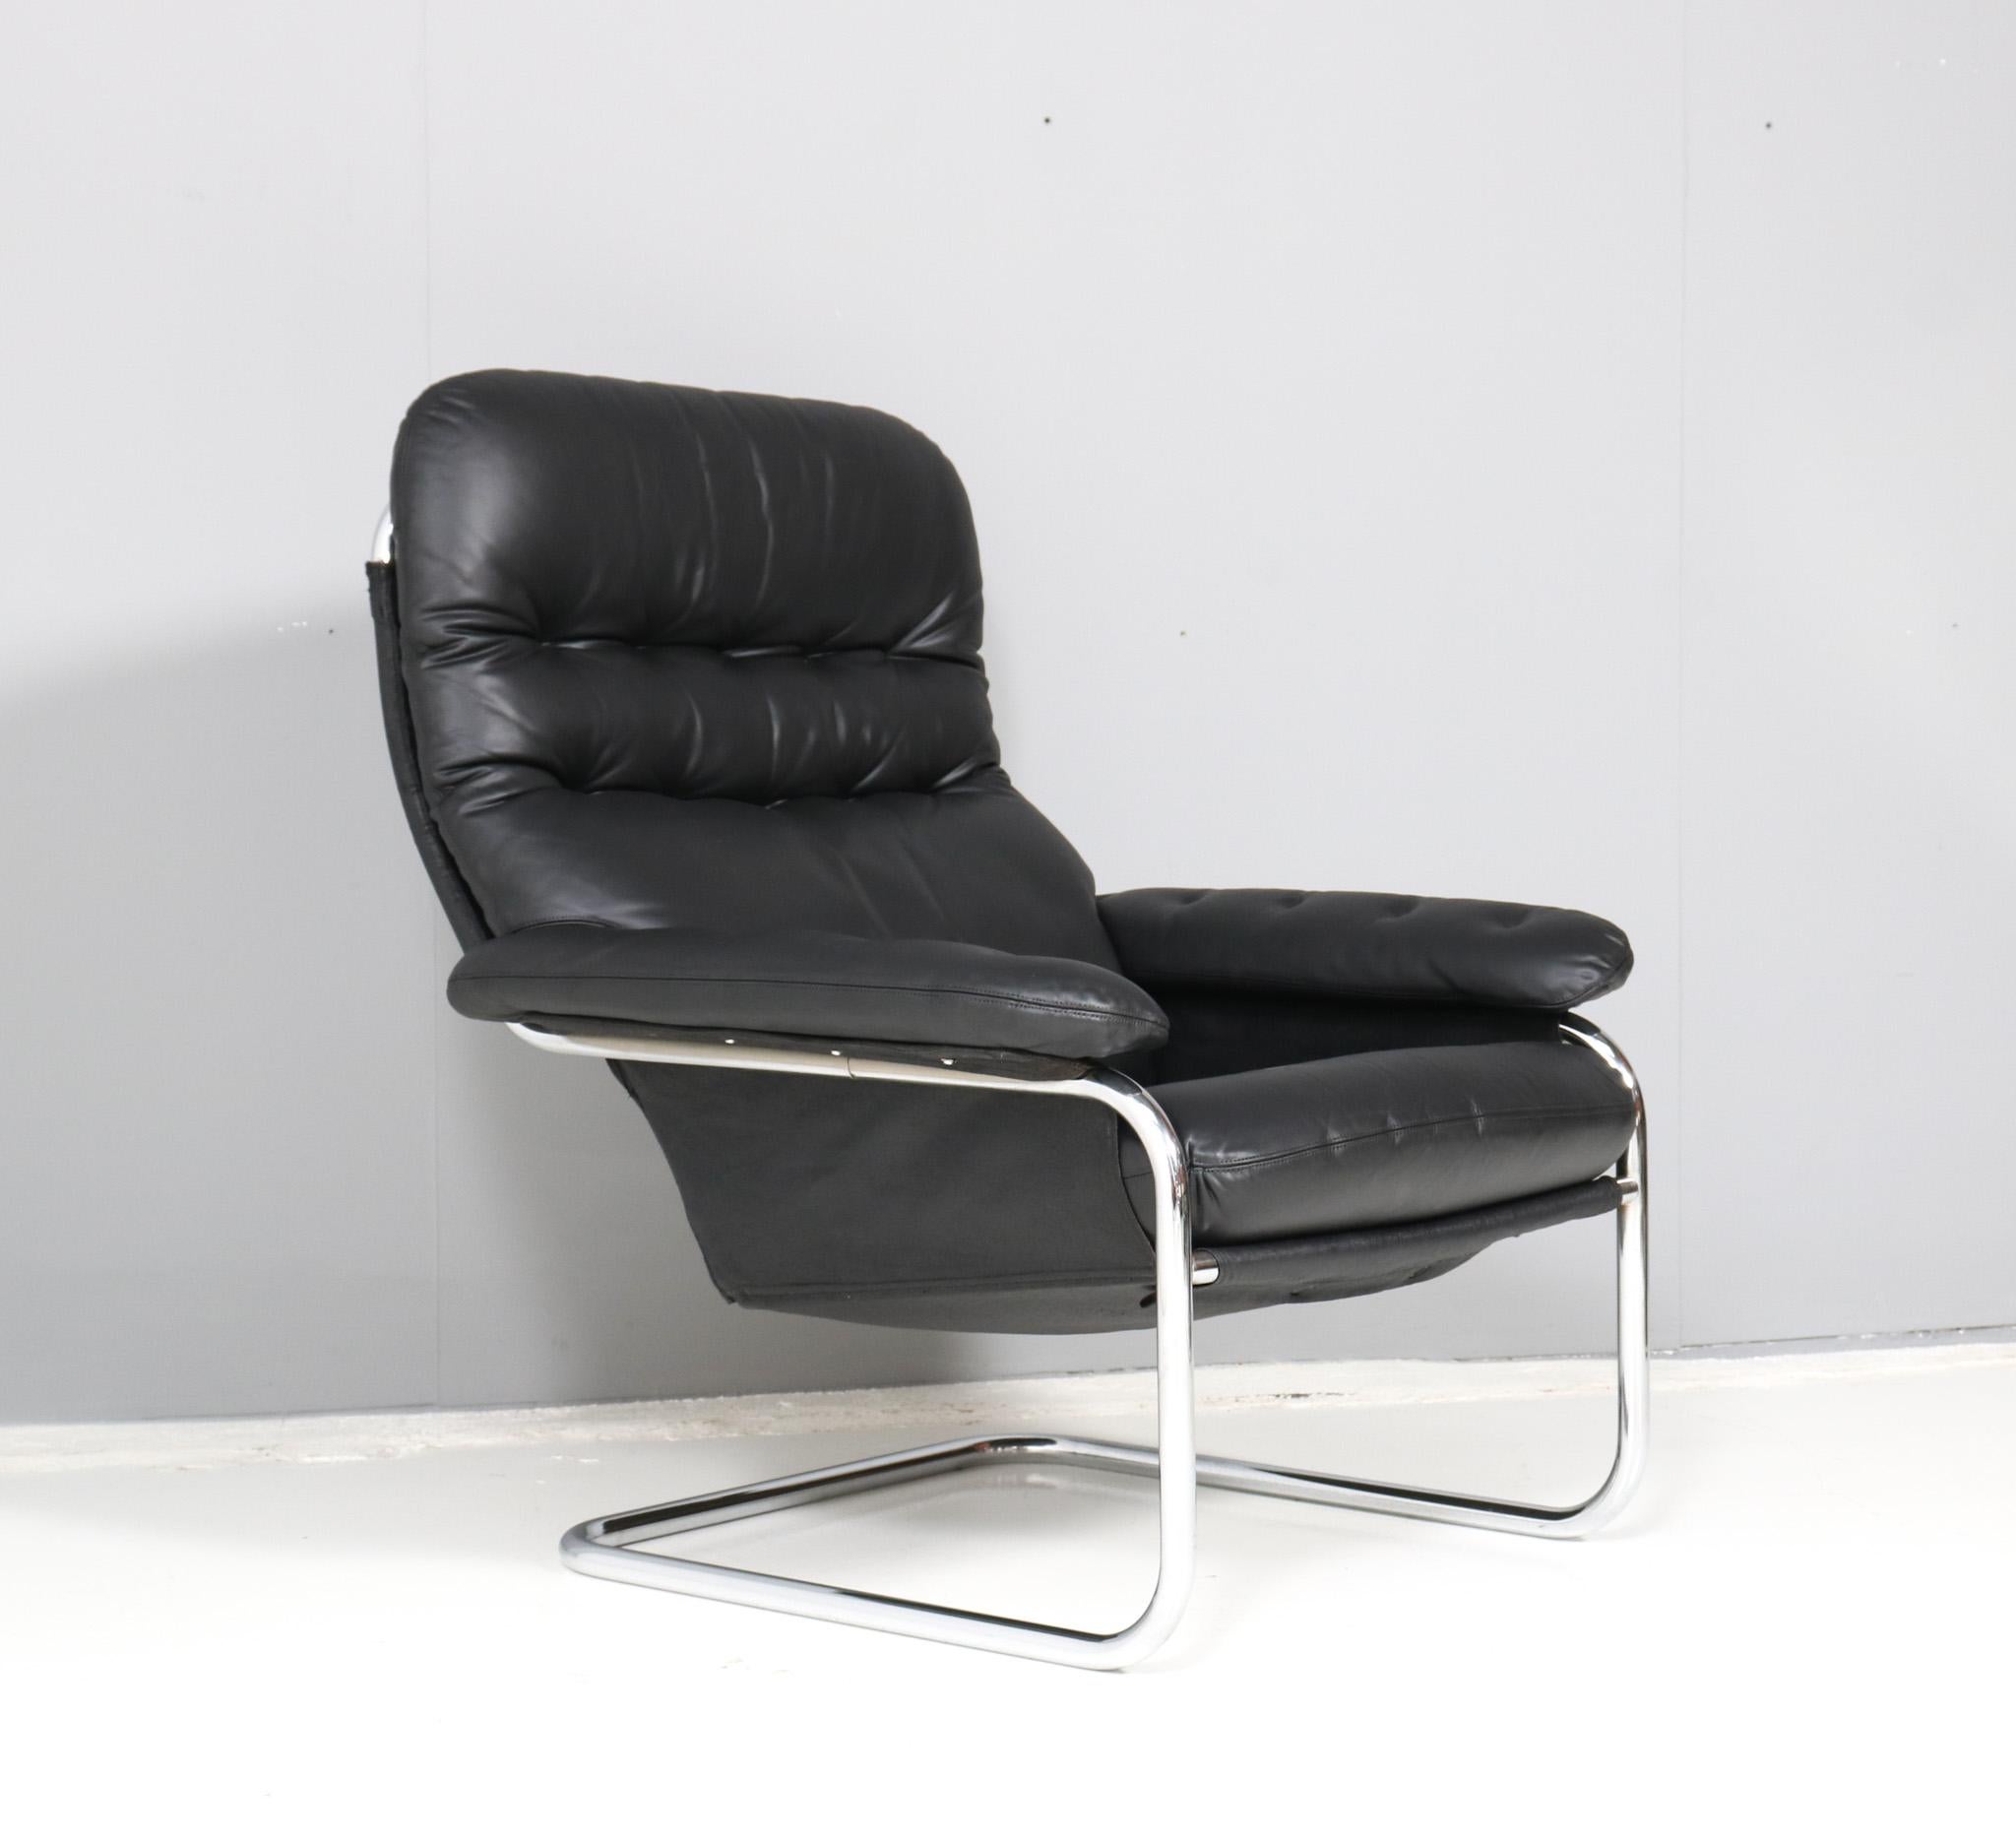 Late 20th Century Mid-Century Modern Cantilever Lounge Chair by Sam Larsson for Dux, 1972 For Sale